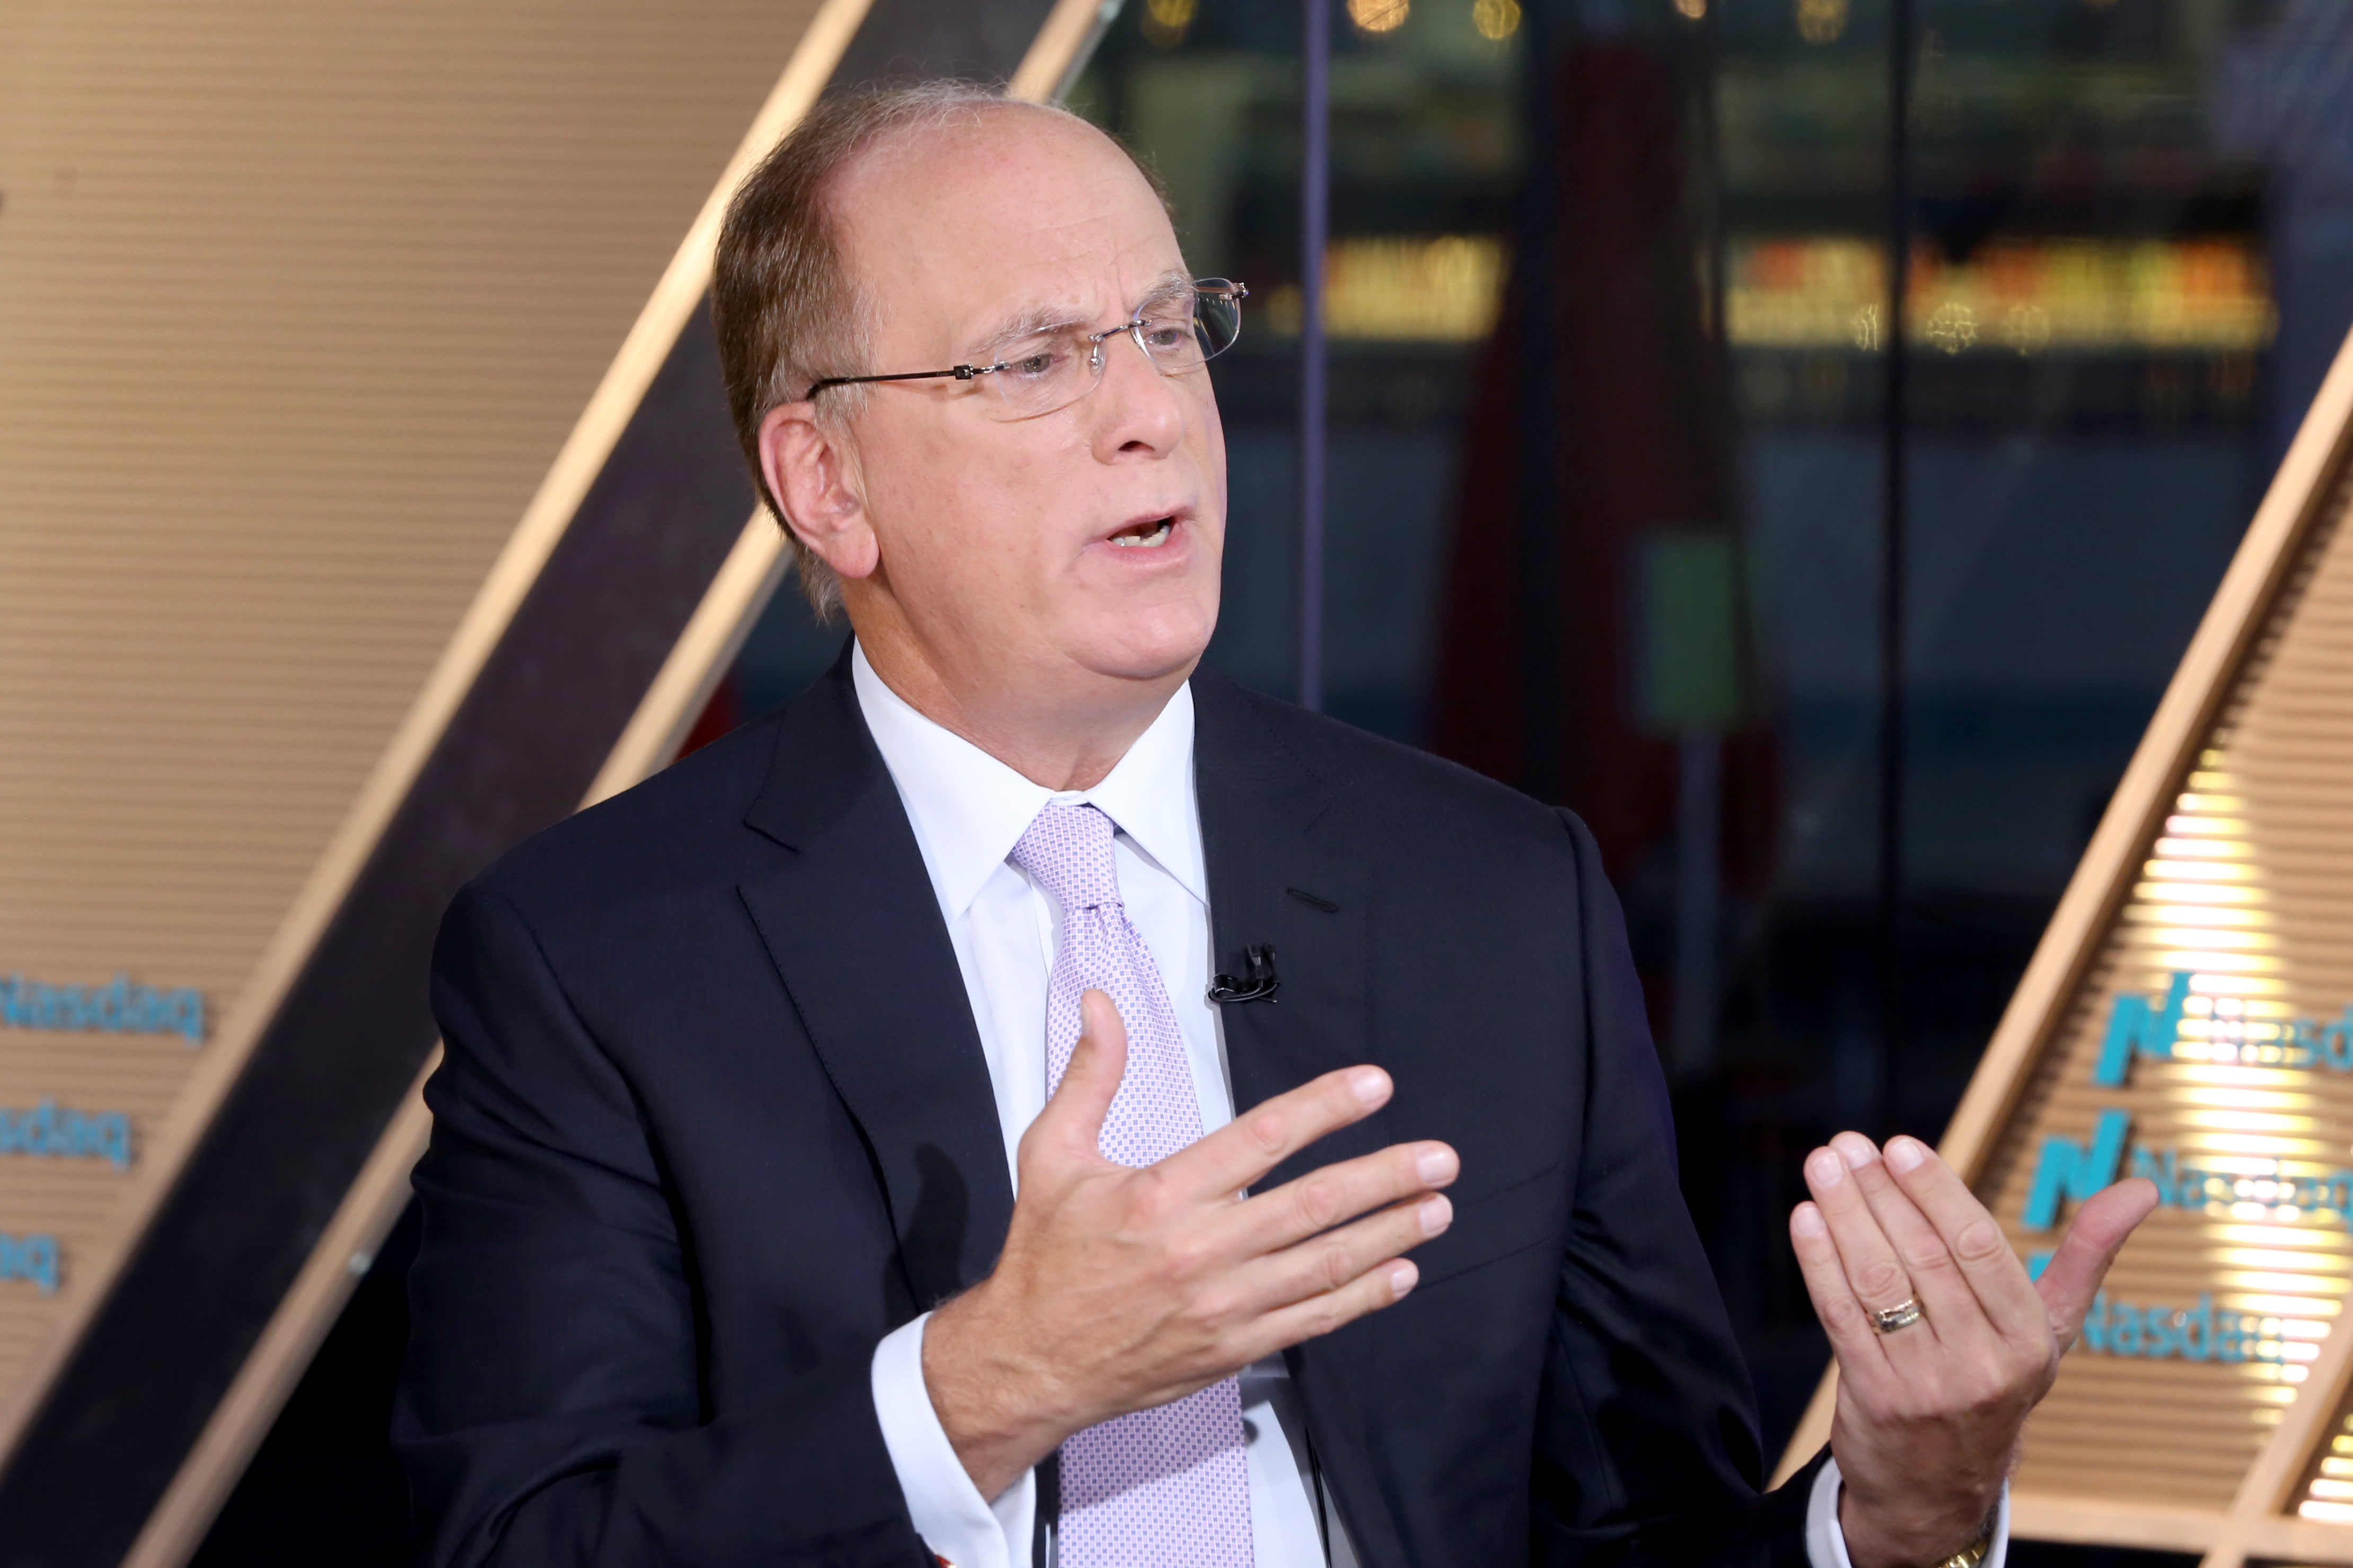 Larry Fink comments on how India’s affinity for gold has had minimal impact on its economy